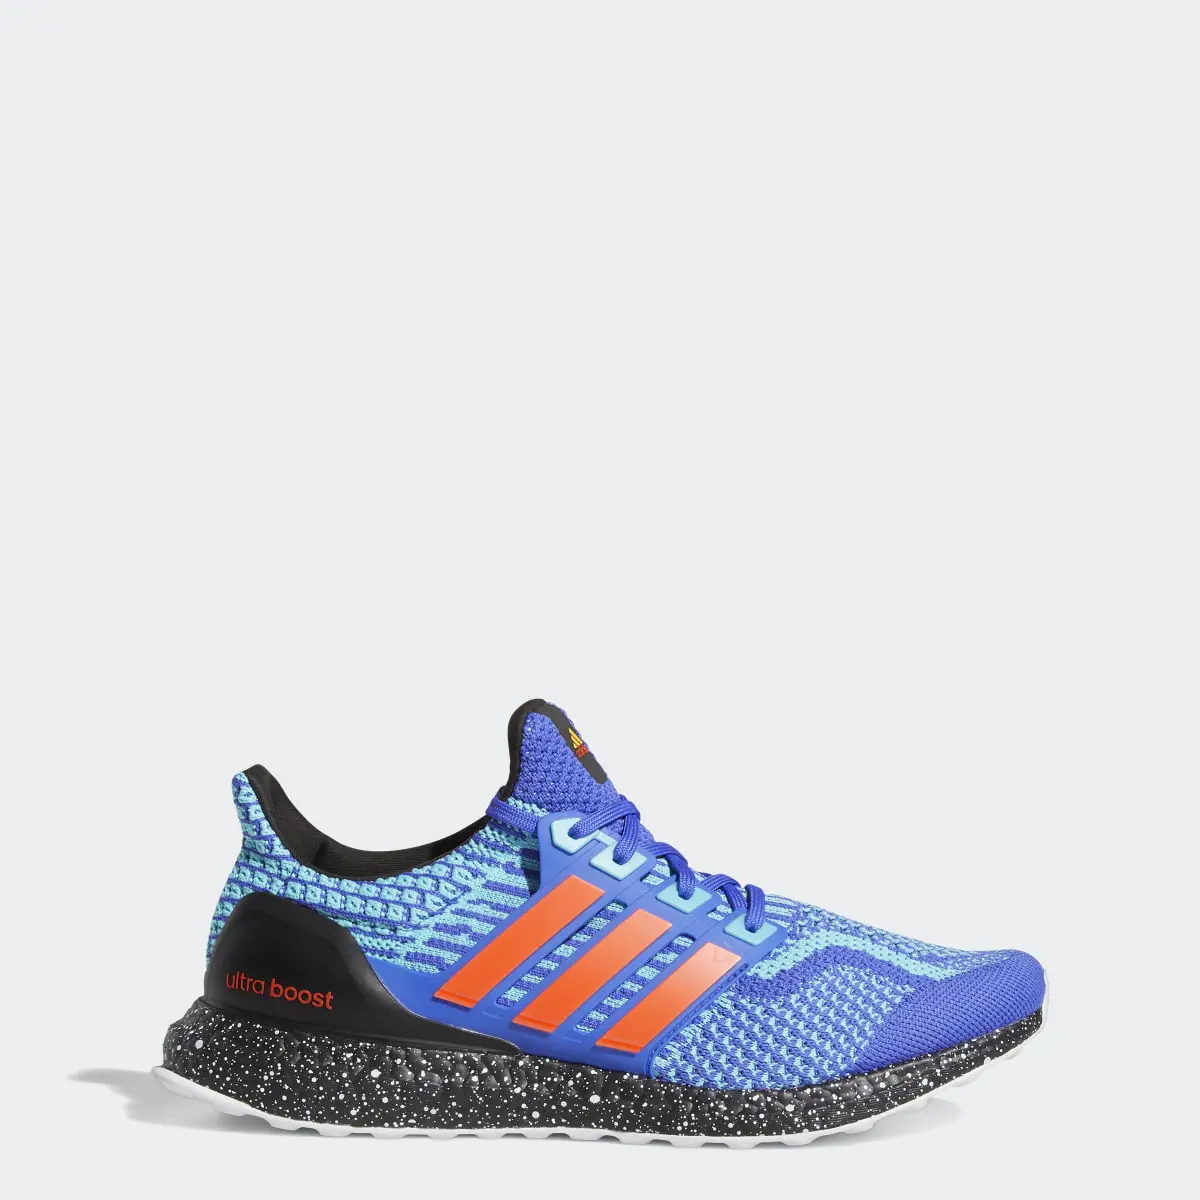 Adidas Ultraboost 5.0 DNA Shoes. 1